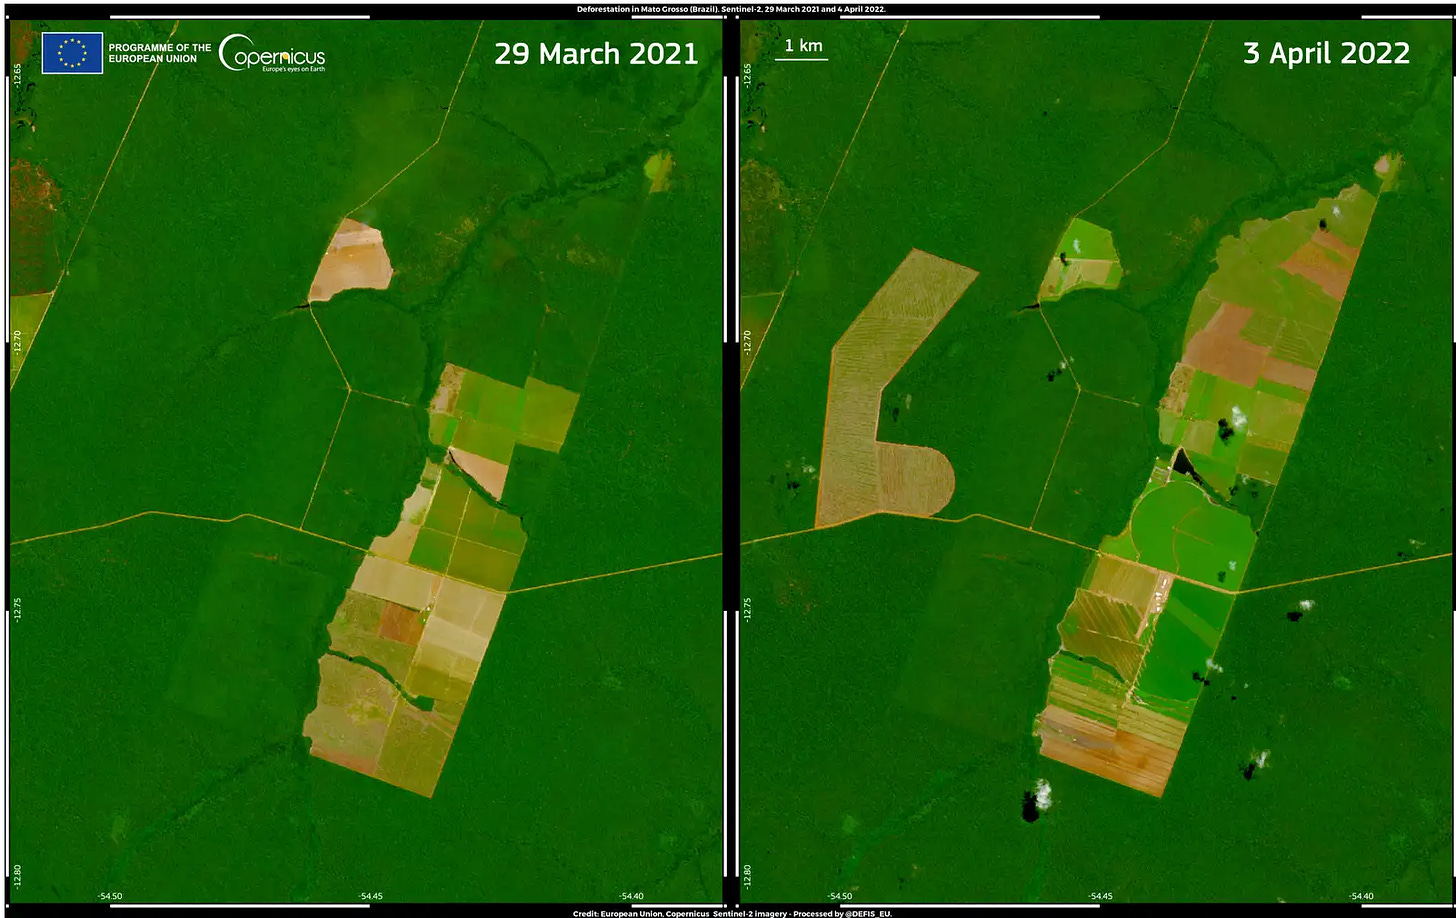 A pair of satellite images of the same area of the Brazilian Amazon in March 2021 and April 2022, showing a cleared area (clearly visible as straight-edged light green areas against the darker green of the forest) nearly doubling in size between the two pictures.